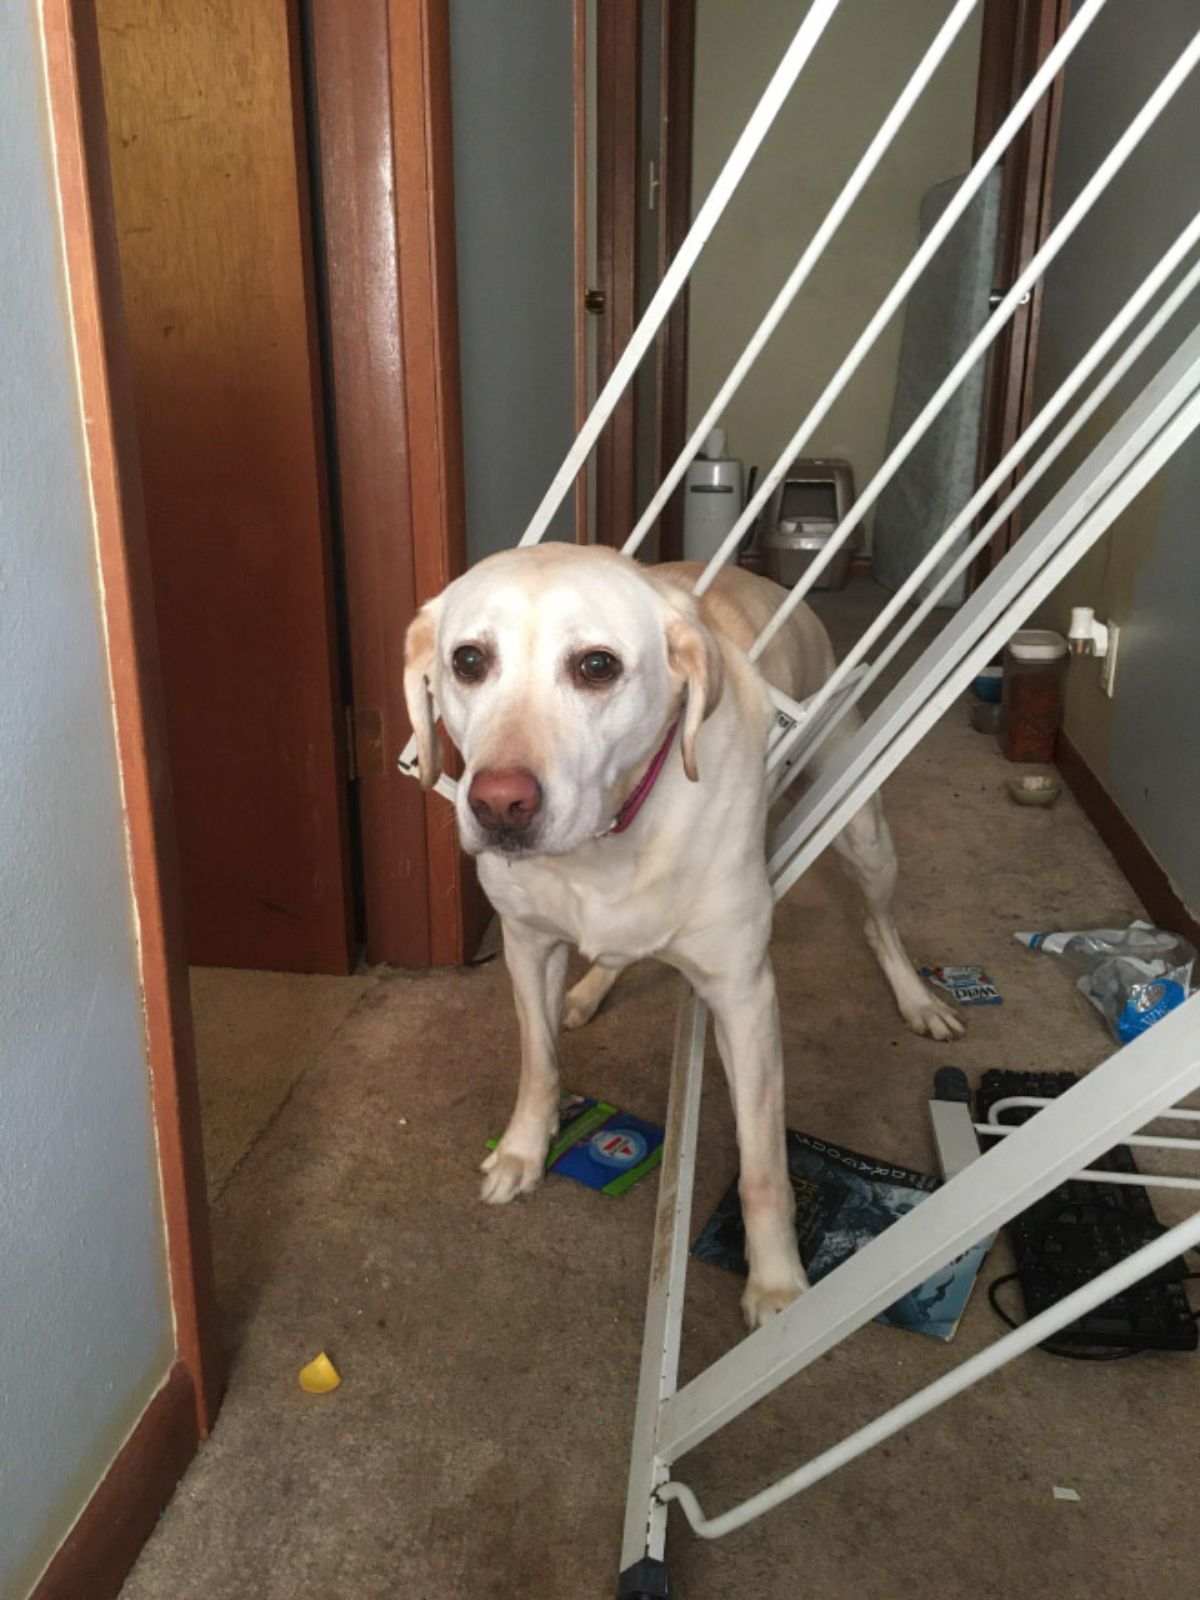 labrador retriever standing in a hallway with the body stuck in a white baby gate